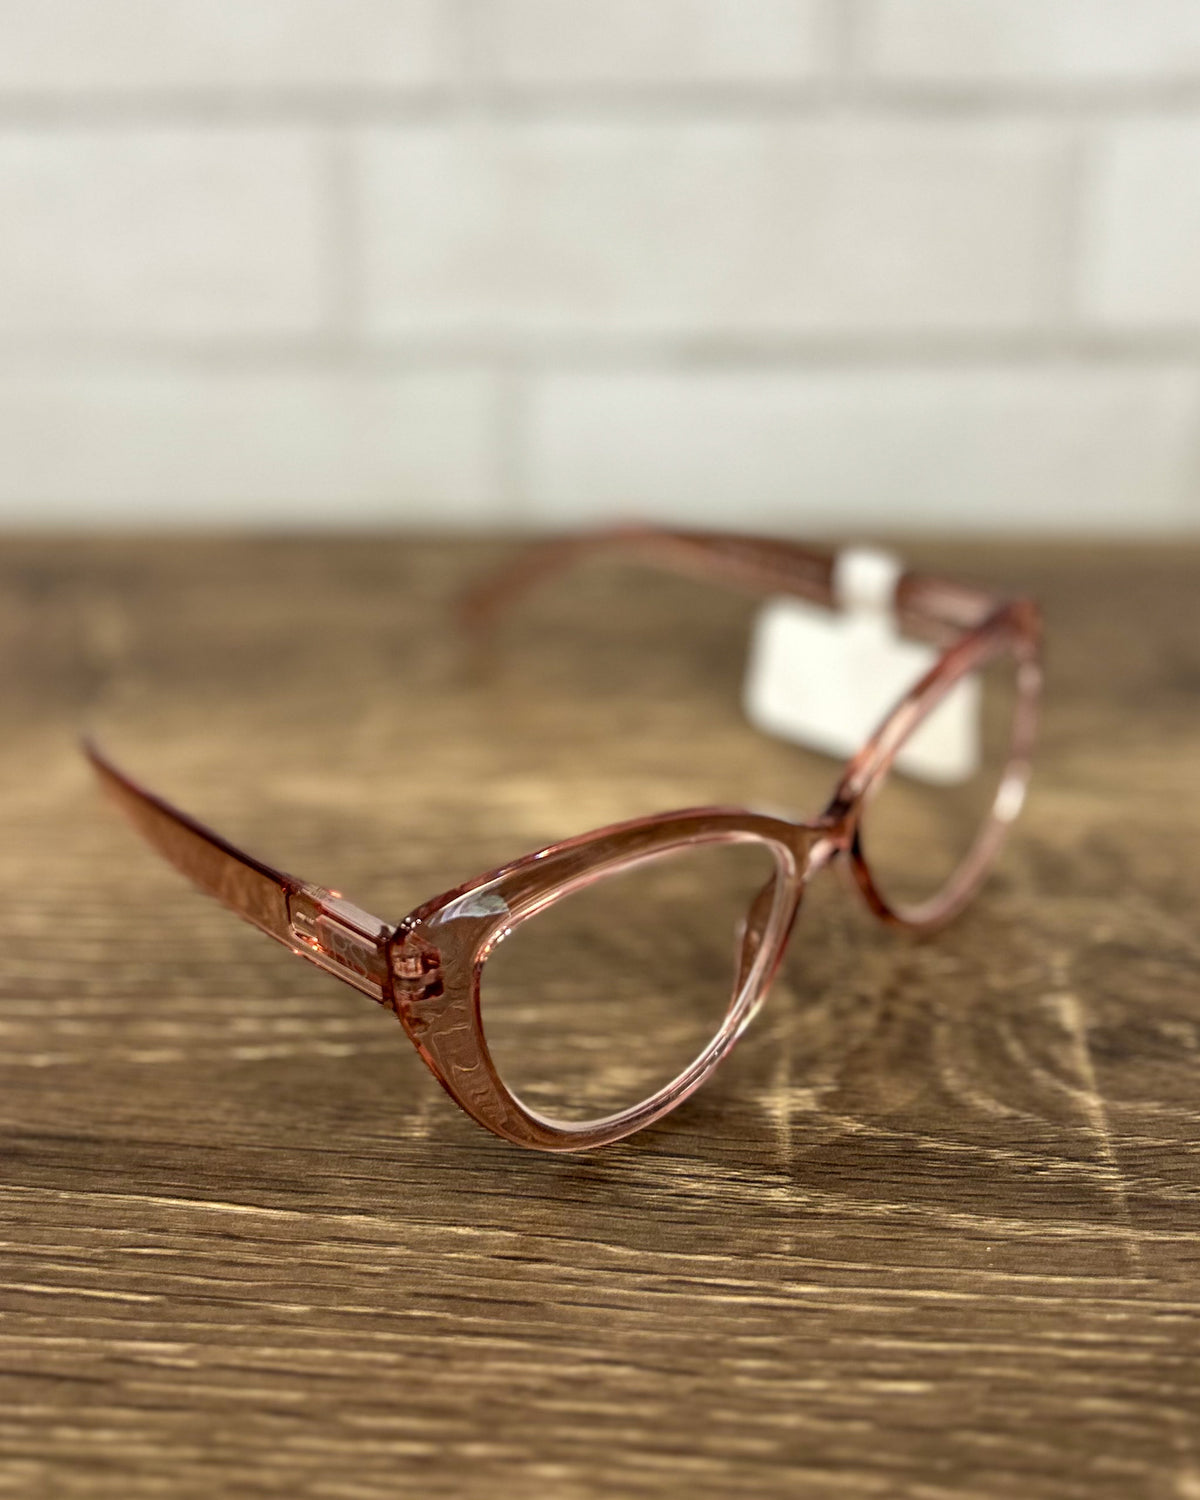 Light Brown Translucent Readers - RS1196